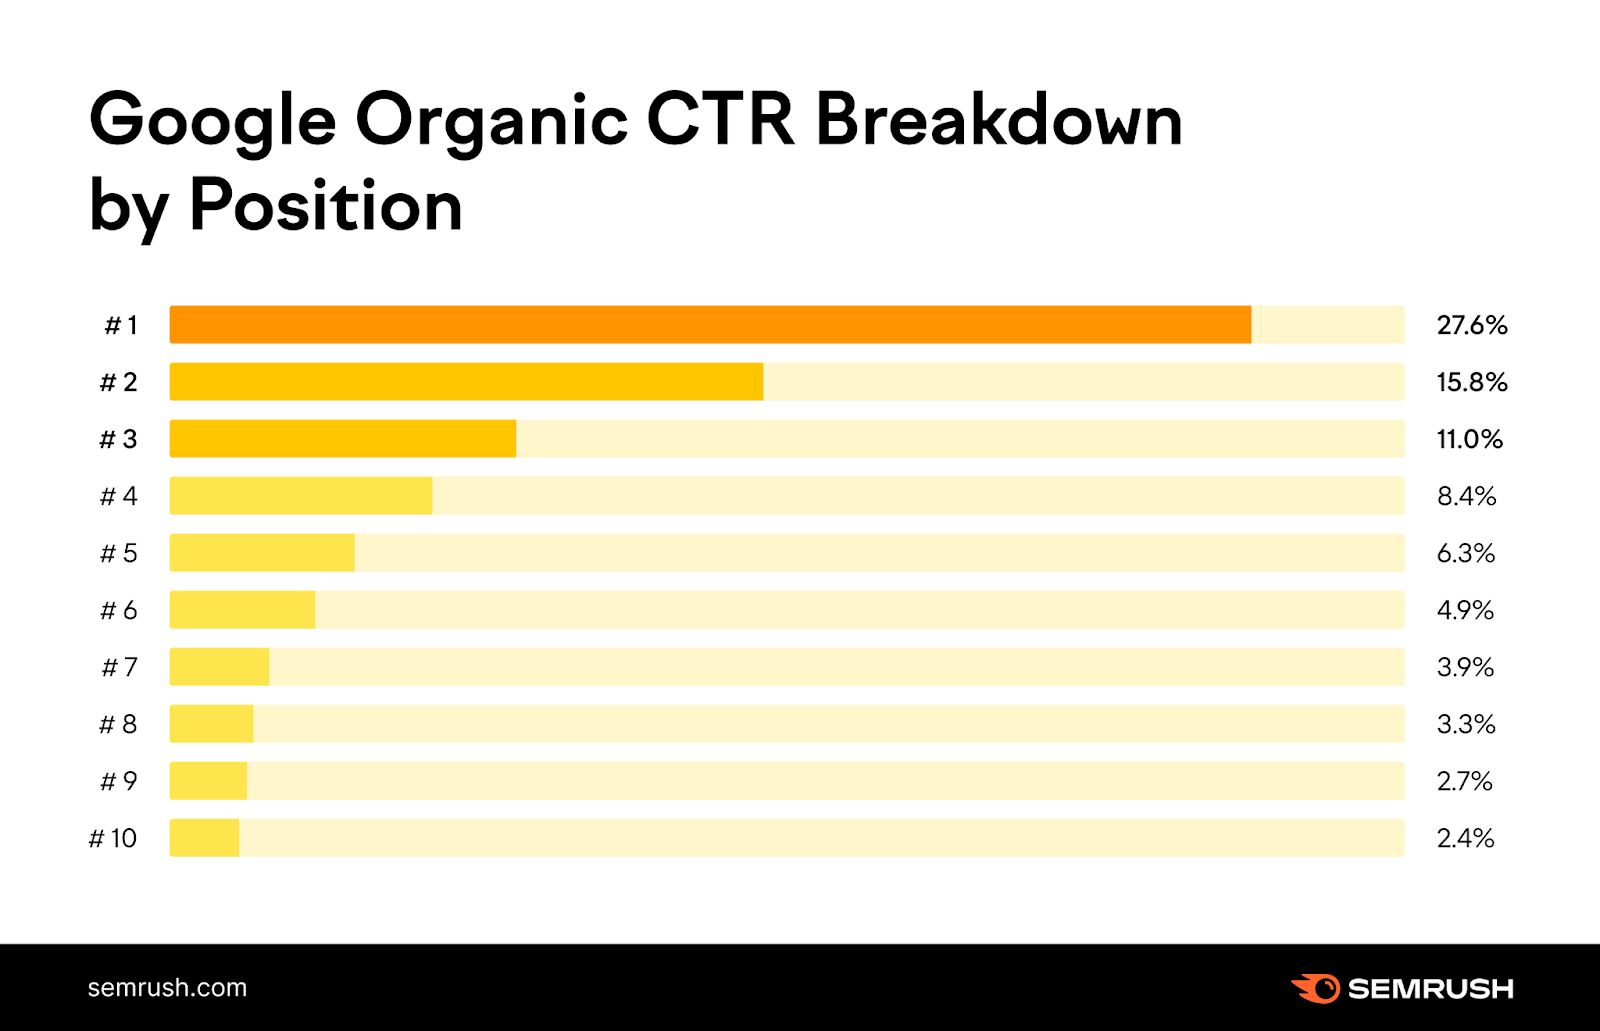 Google organic click-through rate (CTR) breakdown by position